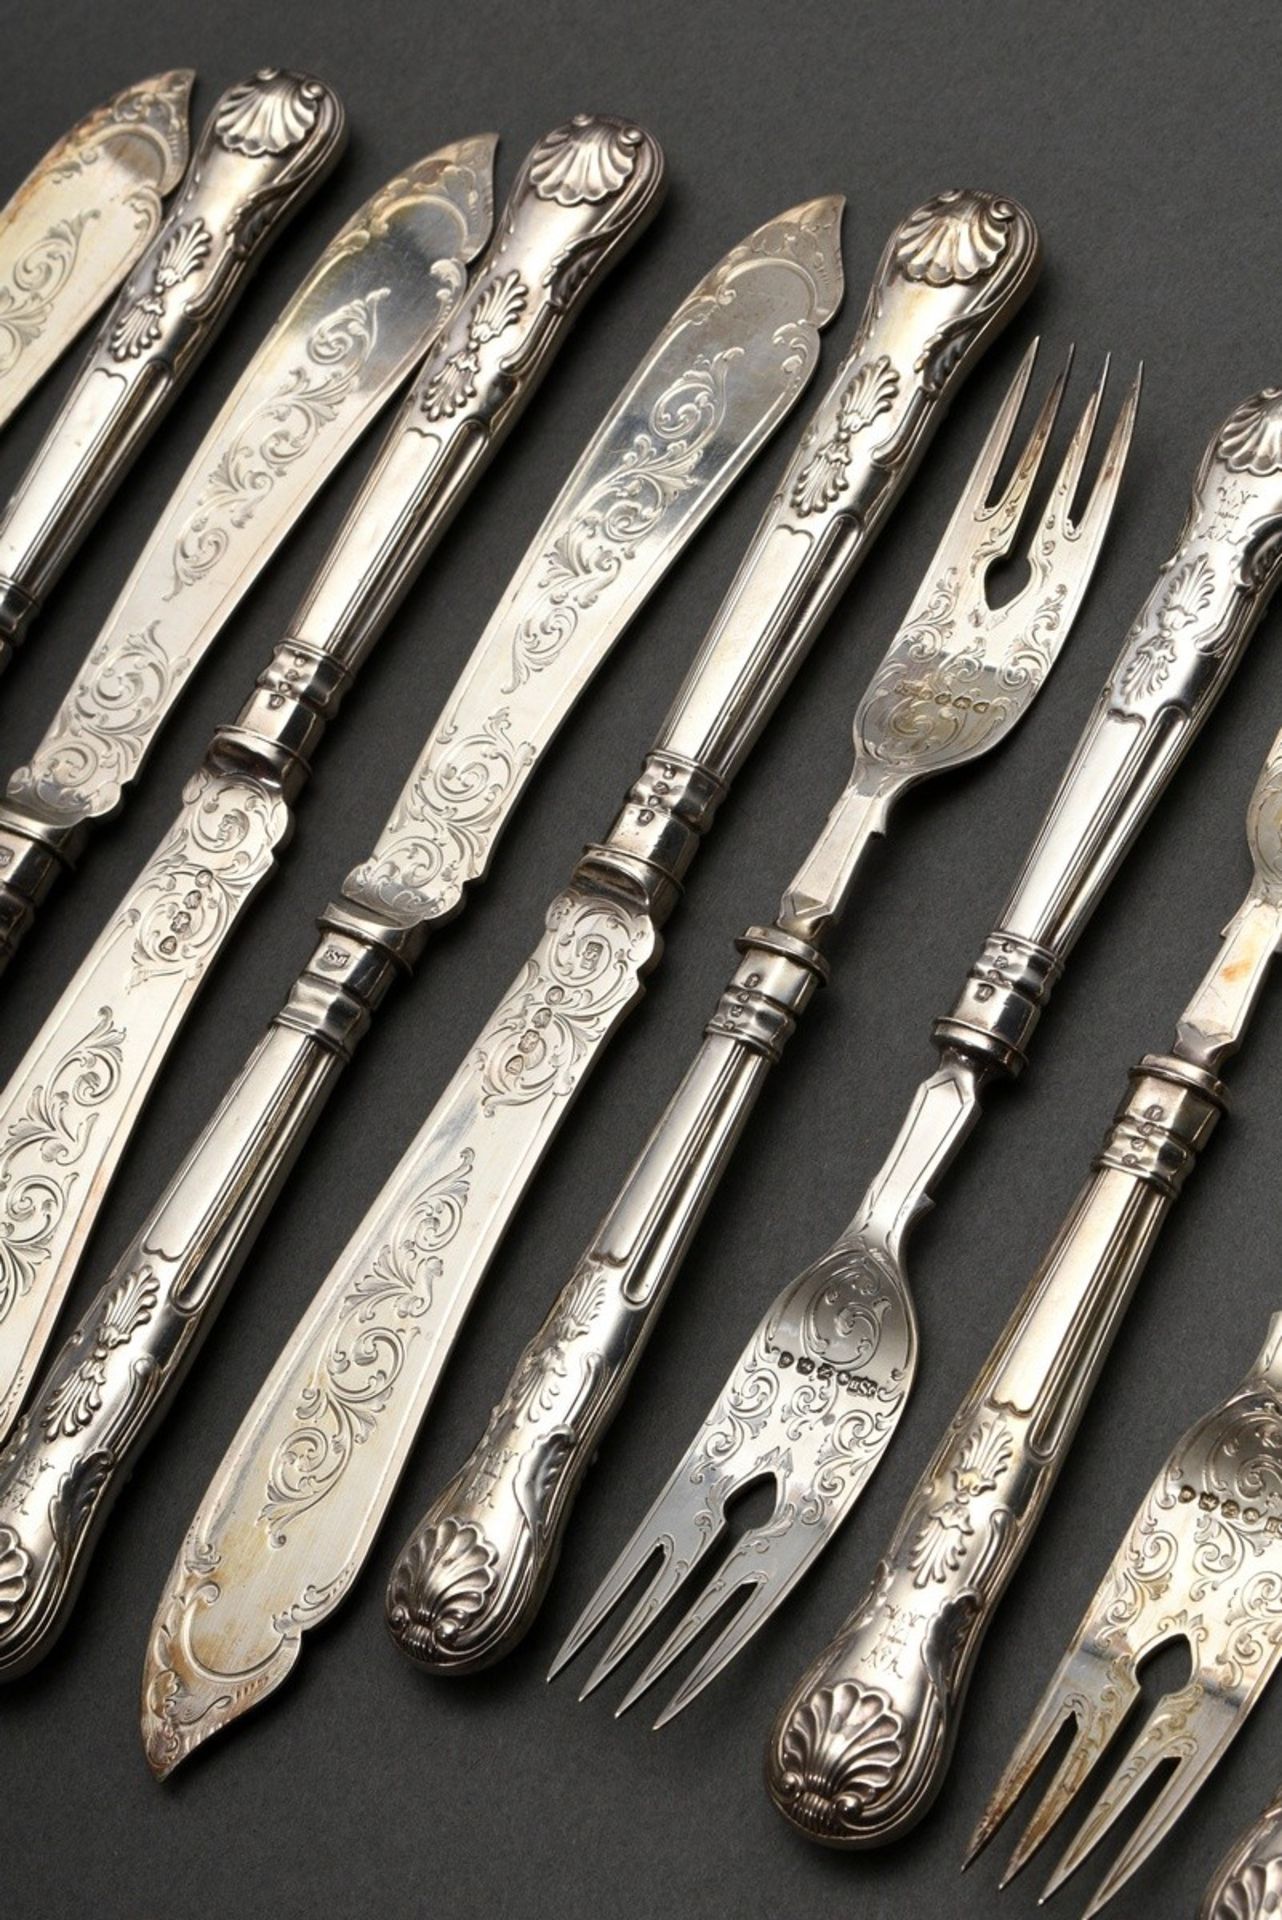 12 Pieces fish cutlery set with ornamentally engraved blades and spoons in the Kings pattern with m